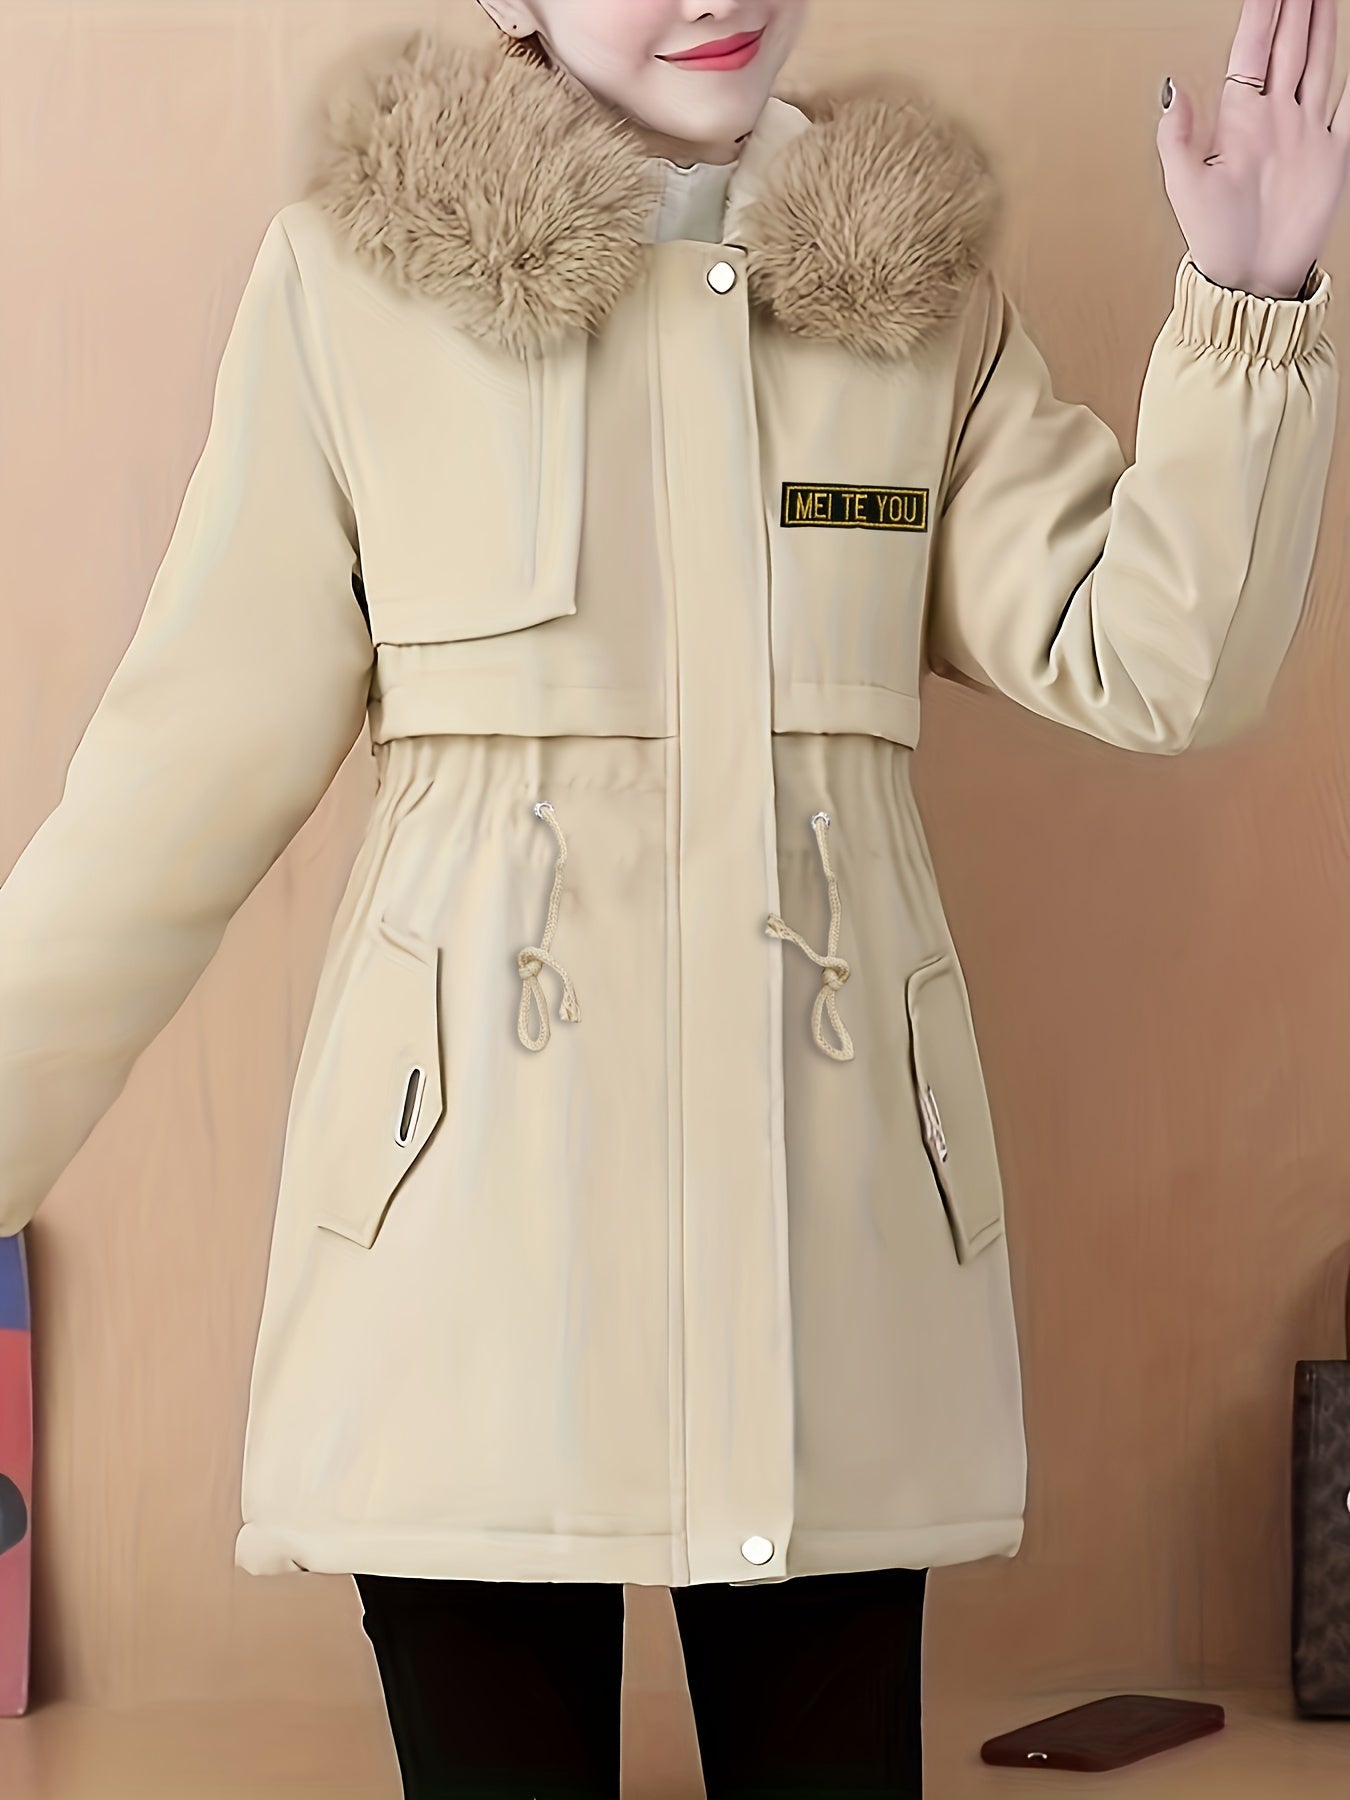 vlovelaw  Fluffy Trim Zip Up Coat, Casual Solid Long Sleeve Winter Outerwear, Women's Clothing